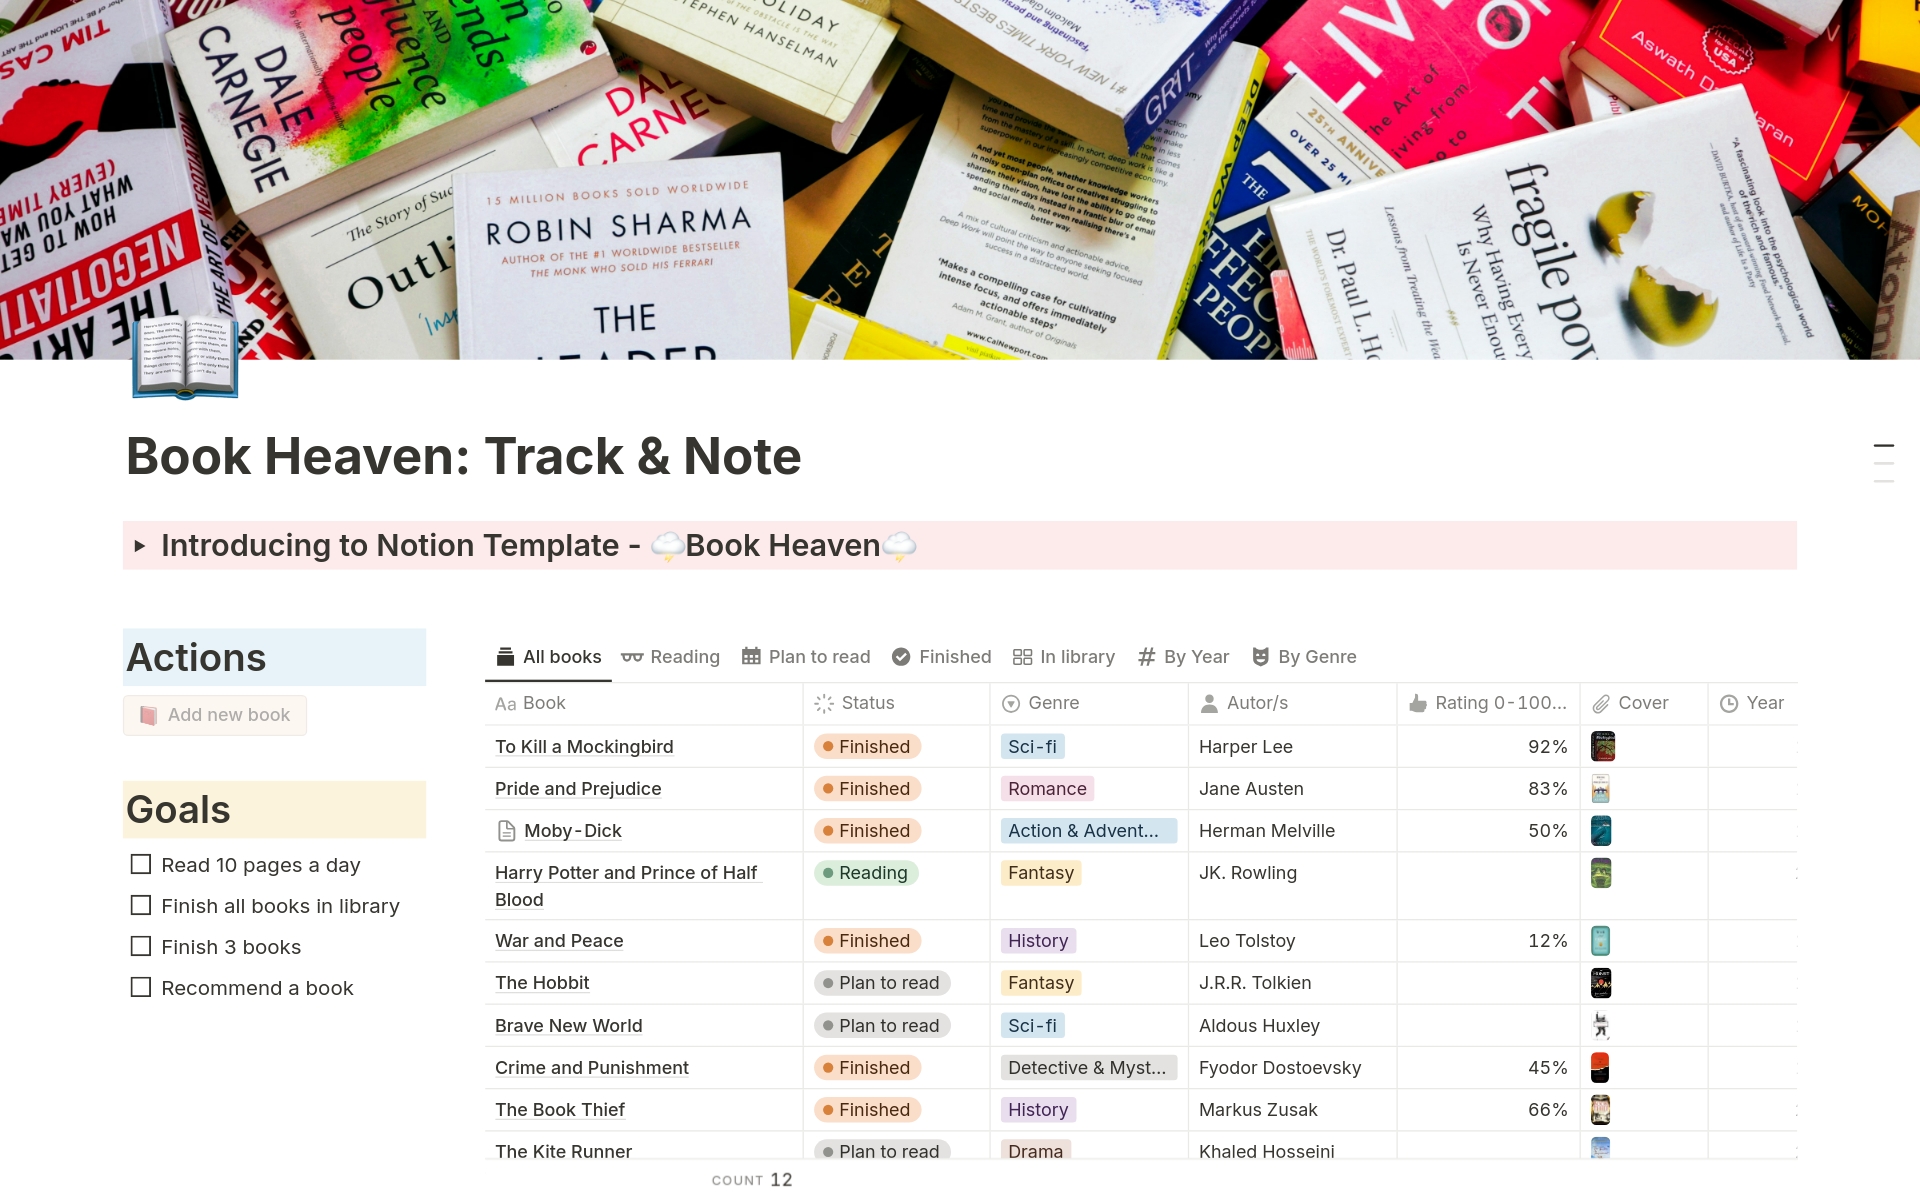 Organize your reading journey with ease. Track finished books, catalog books, rate, and manage plan to read list - all in one place. Perfect for book lovers to stay organized. Dive into Book Heaven and read more efficiently!